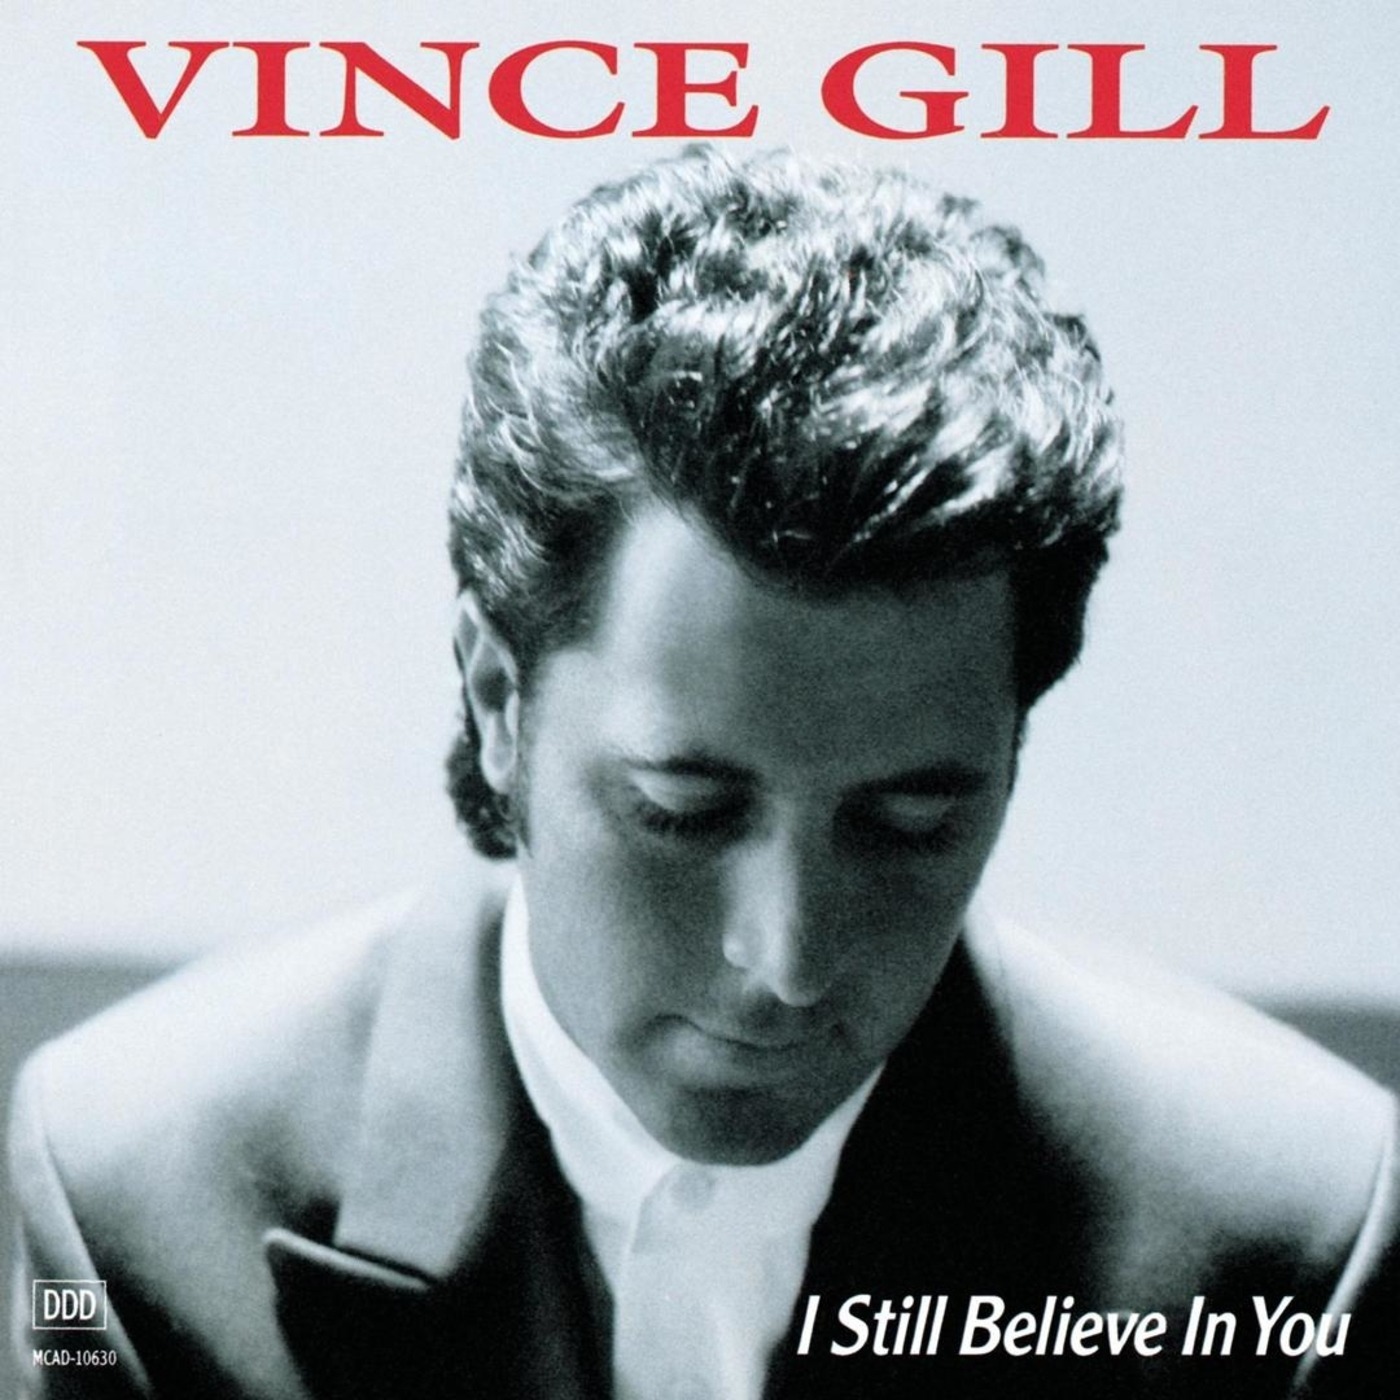 One More Last Chance by Vince Gill